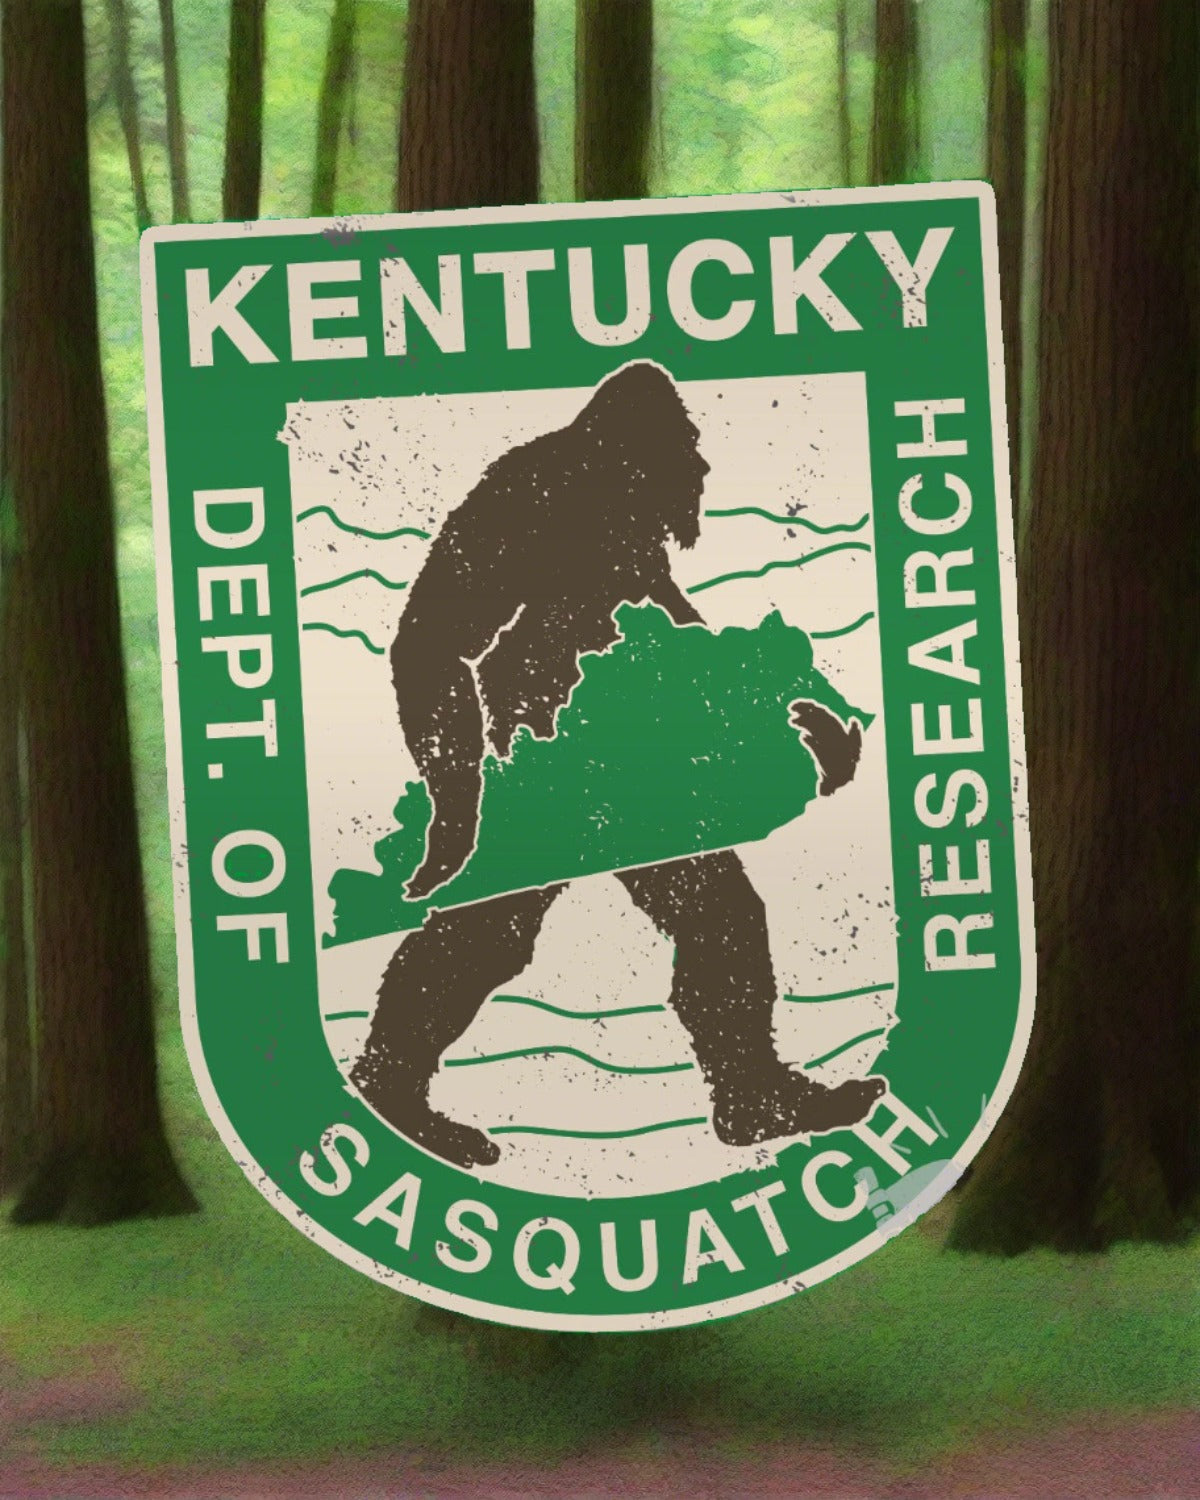 Tee See Tee Apparel & Accessories Kentucky Department of Sasquatch Research UV Coated Decal | Tee See Tee Exclusive